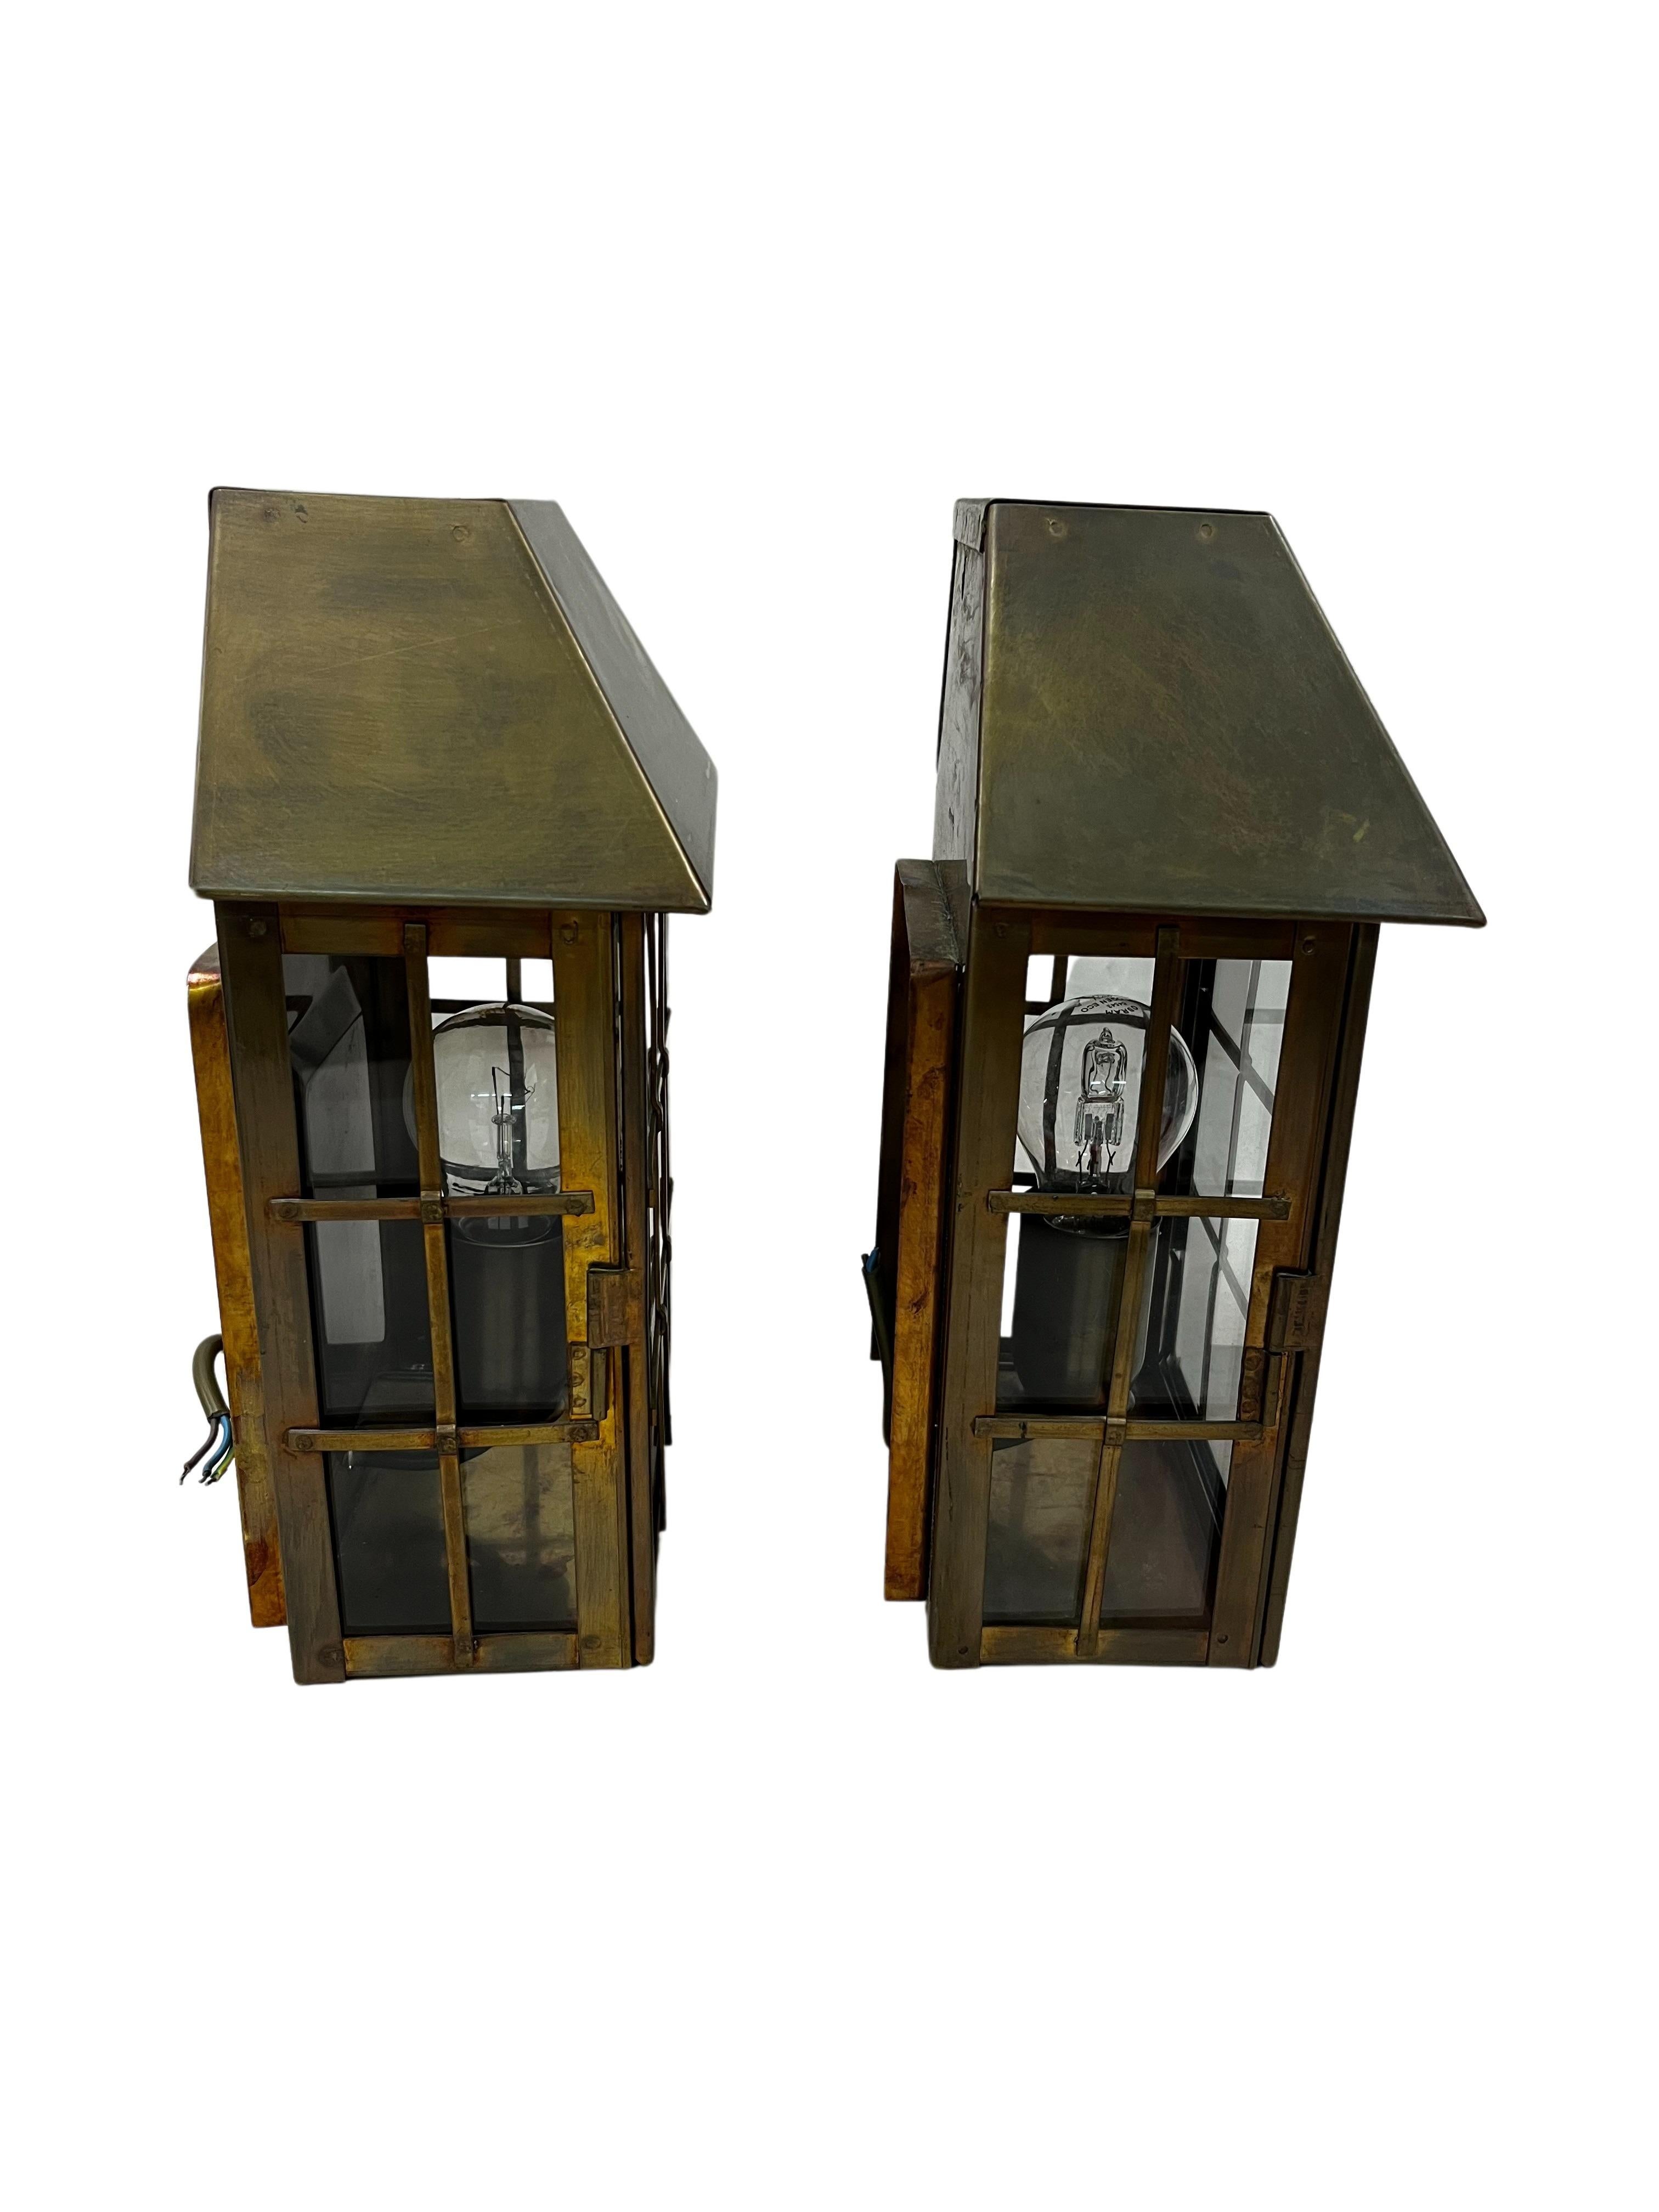 Beautiful special wall lamps with an architectural design, made entirely of brass that has been patinated. Manufactured - probably in Italy, in the 1950s.

The two wall lamps are made like small houses, with roofs and a stylized opening window. The